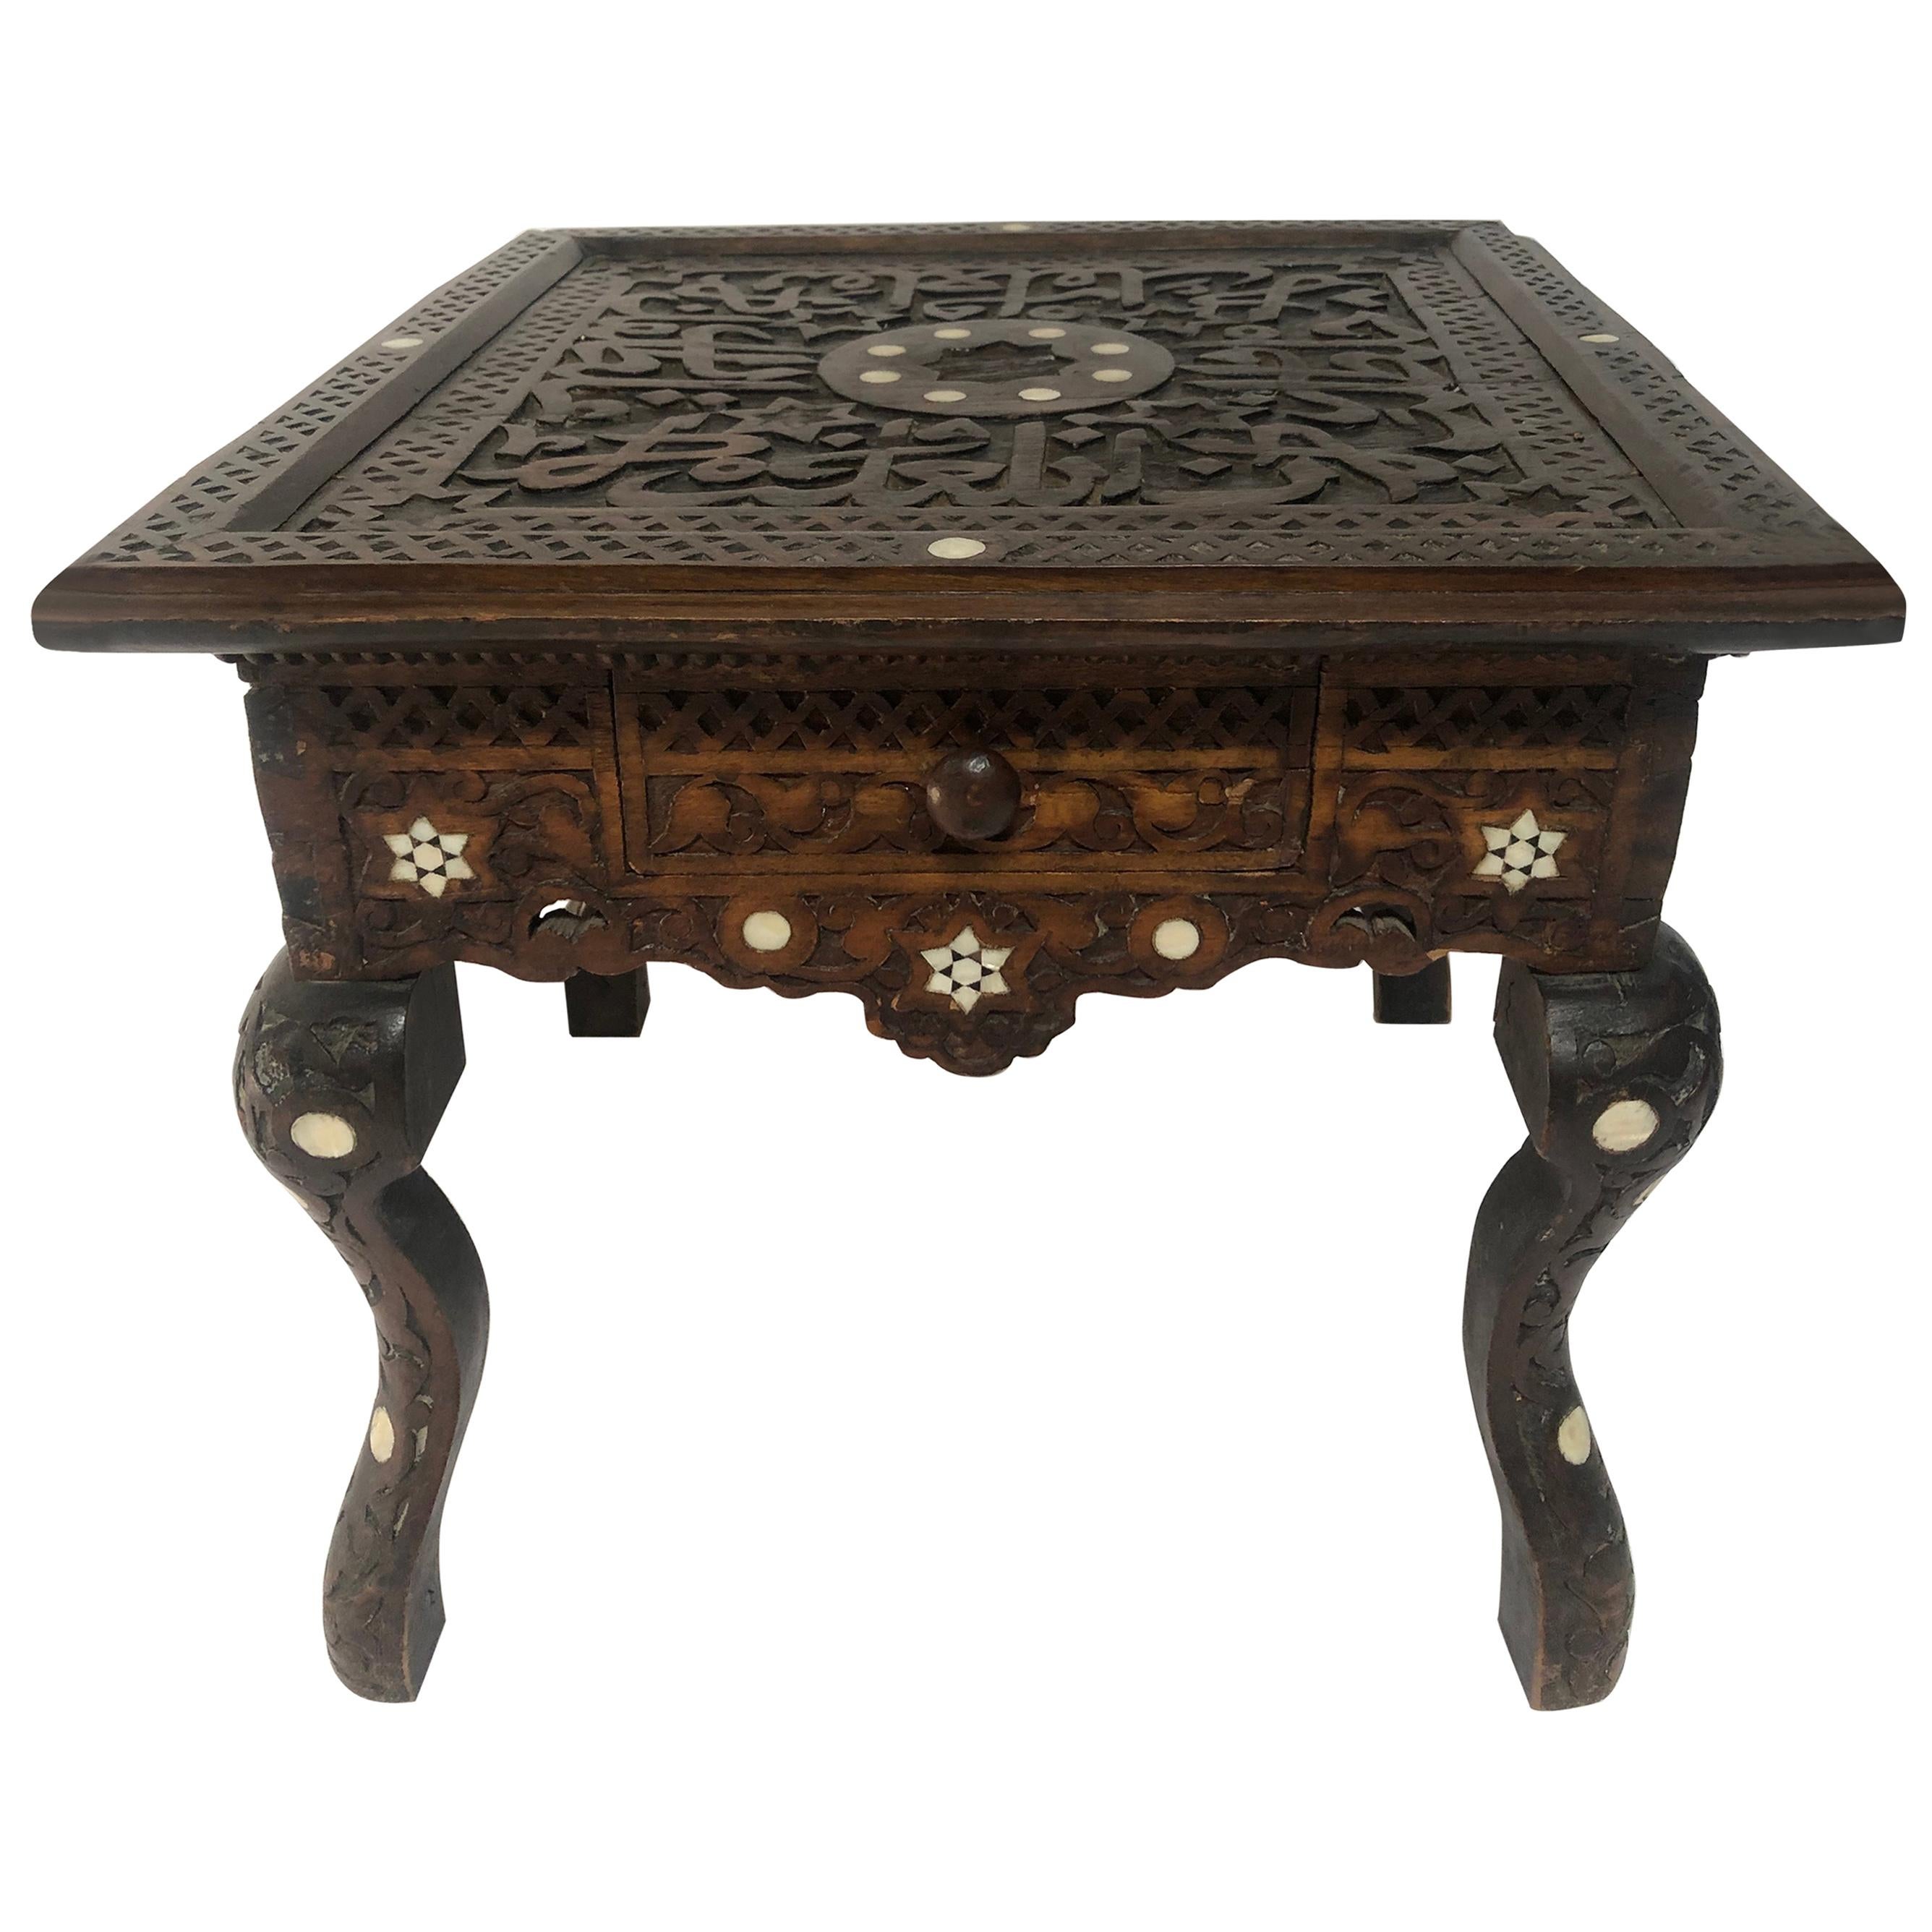 19th Century Syrian Inlay Mother of Pearl Table